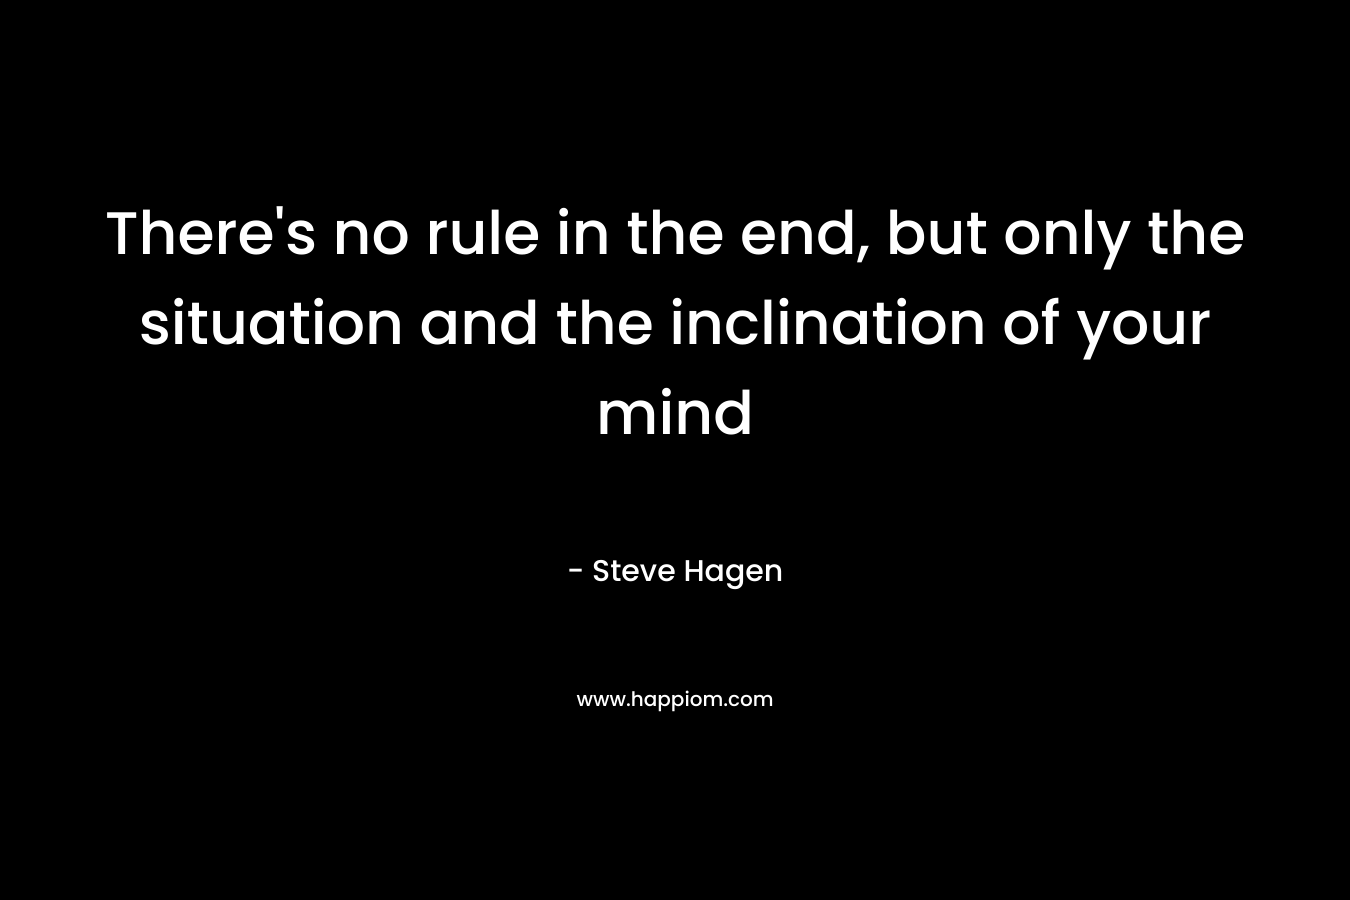 There's no rule in the end, but only the situation and the inclination of your mind